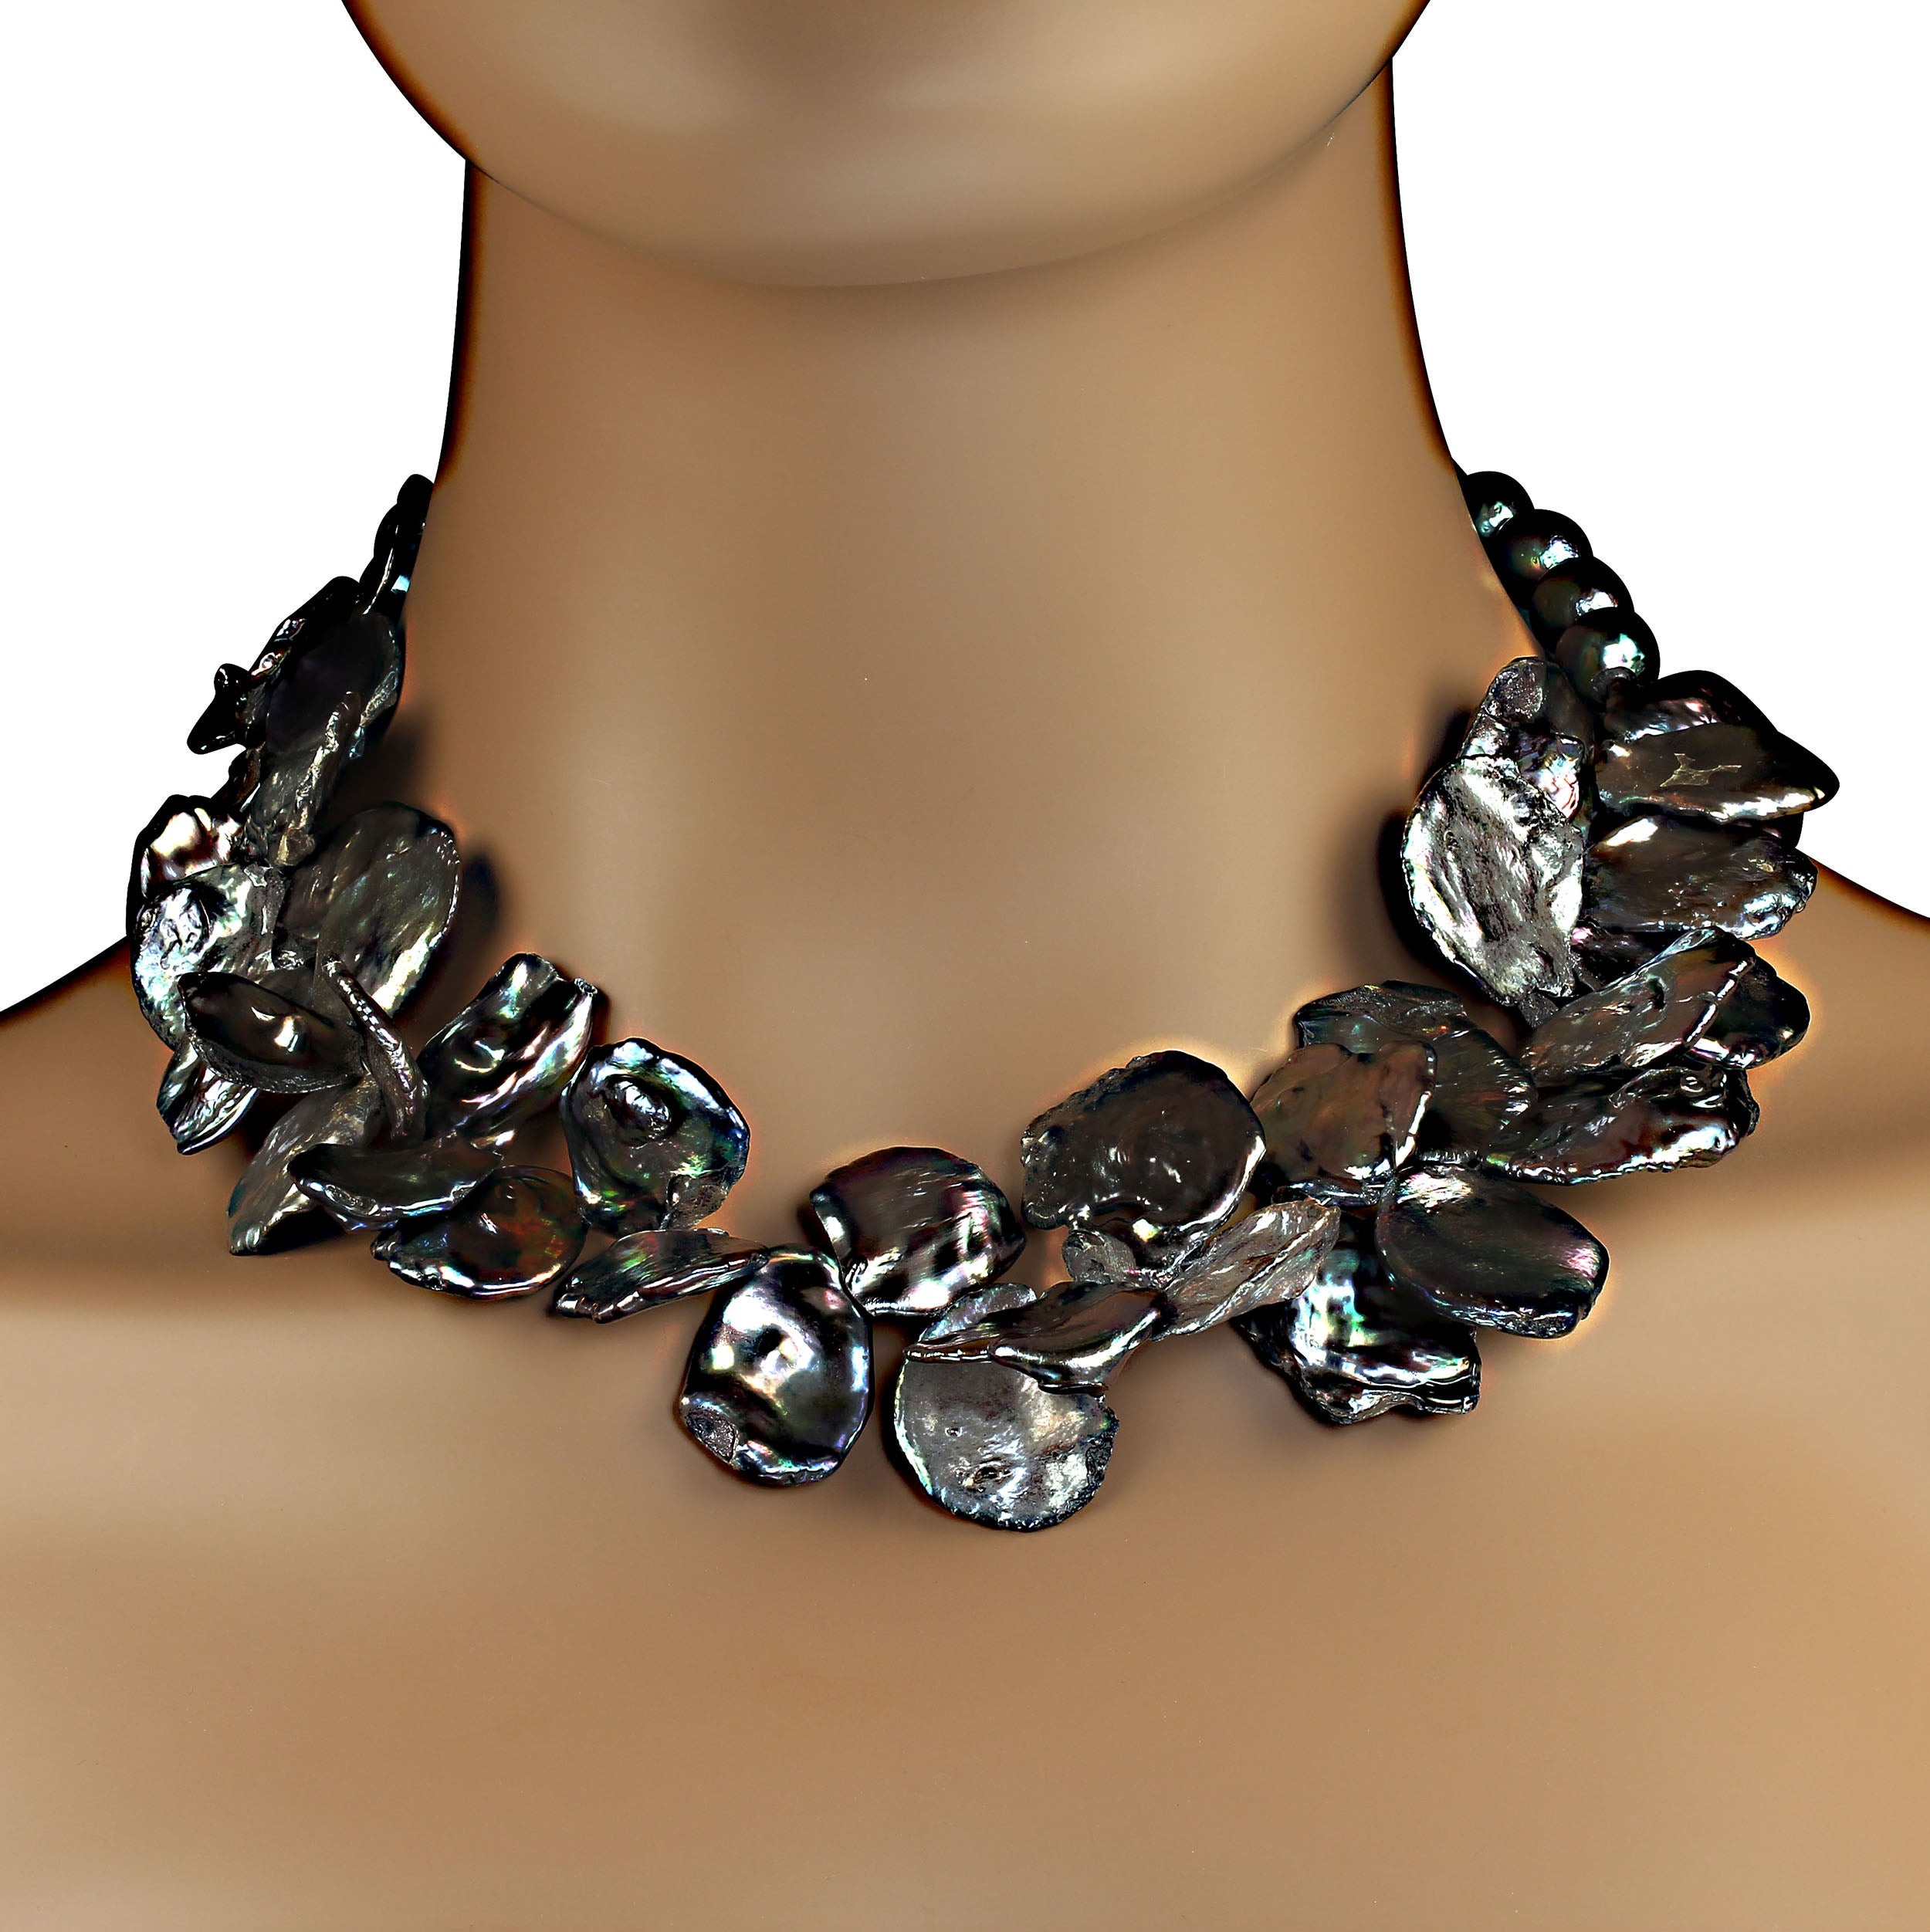 AJD Iridescent Peacock Pearl Petals necklace 17 Inches  Great Gift! For Sale